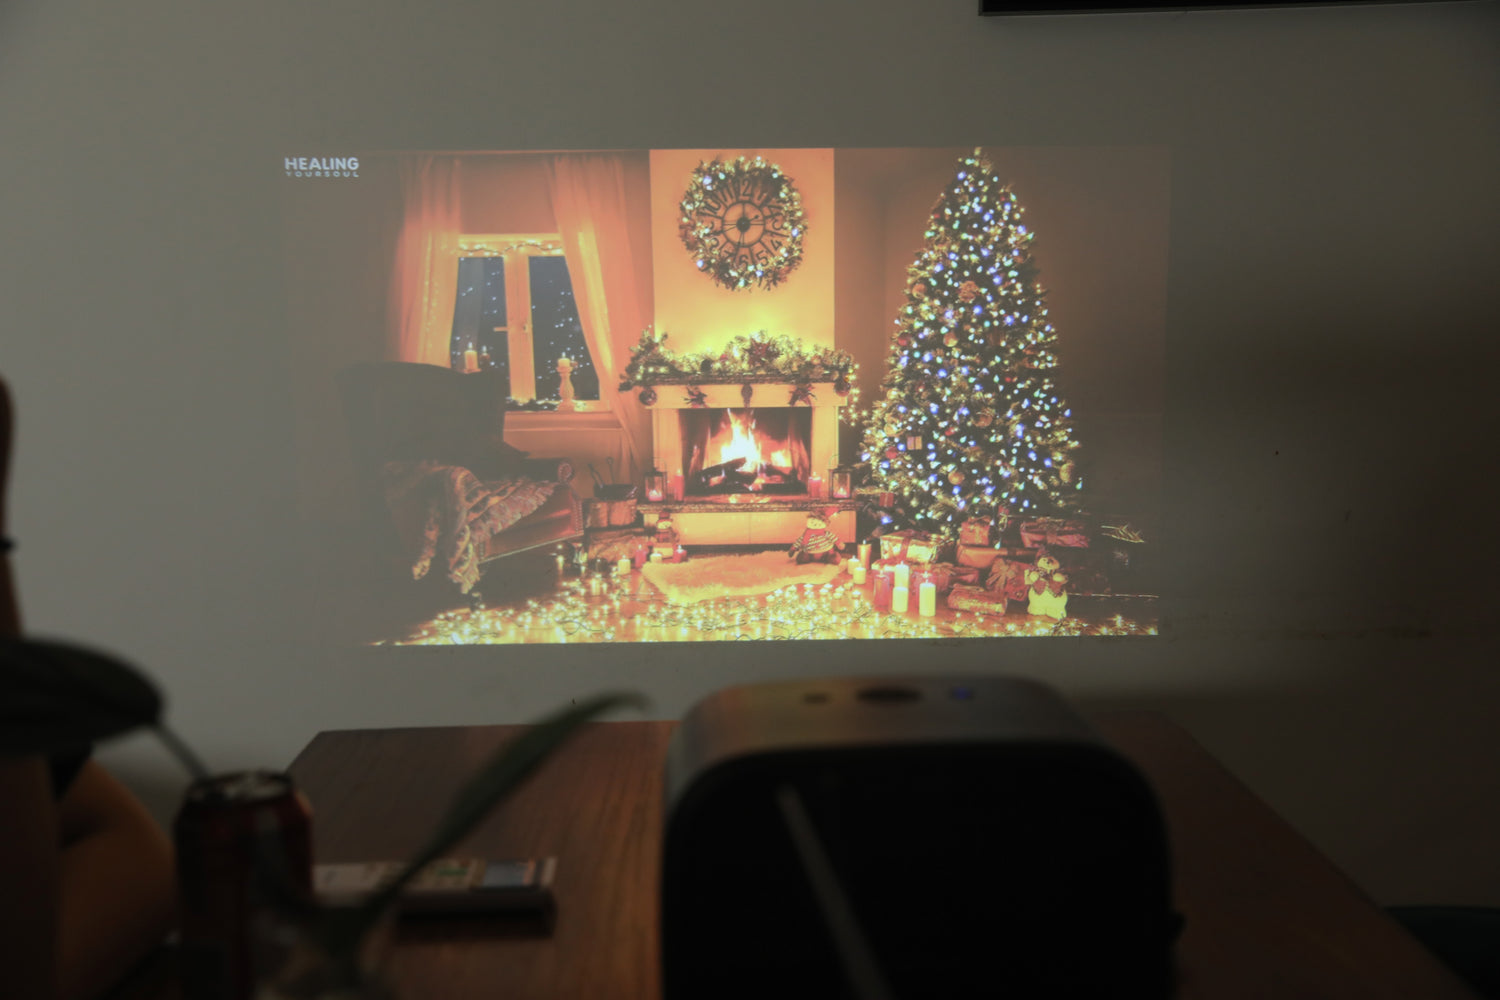 How to replace the default screensaver (campanion videos) for your projector?